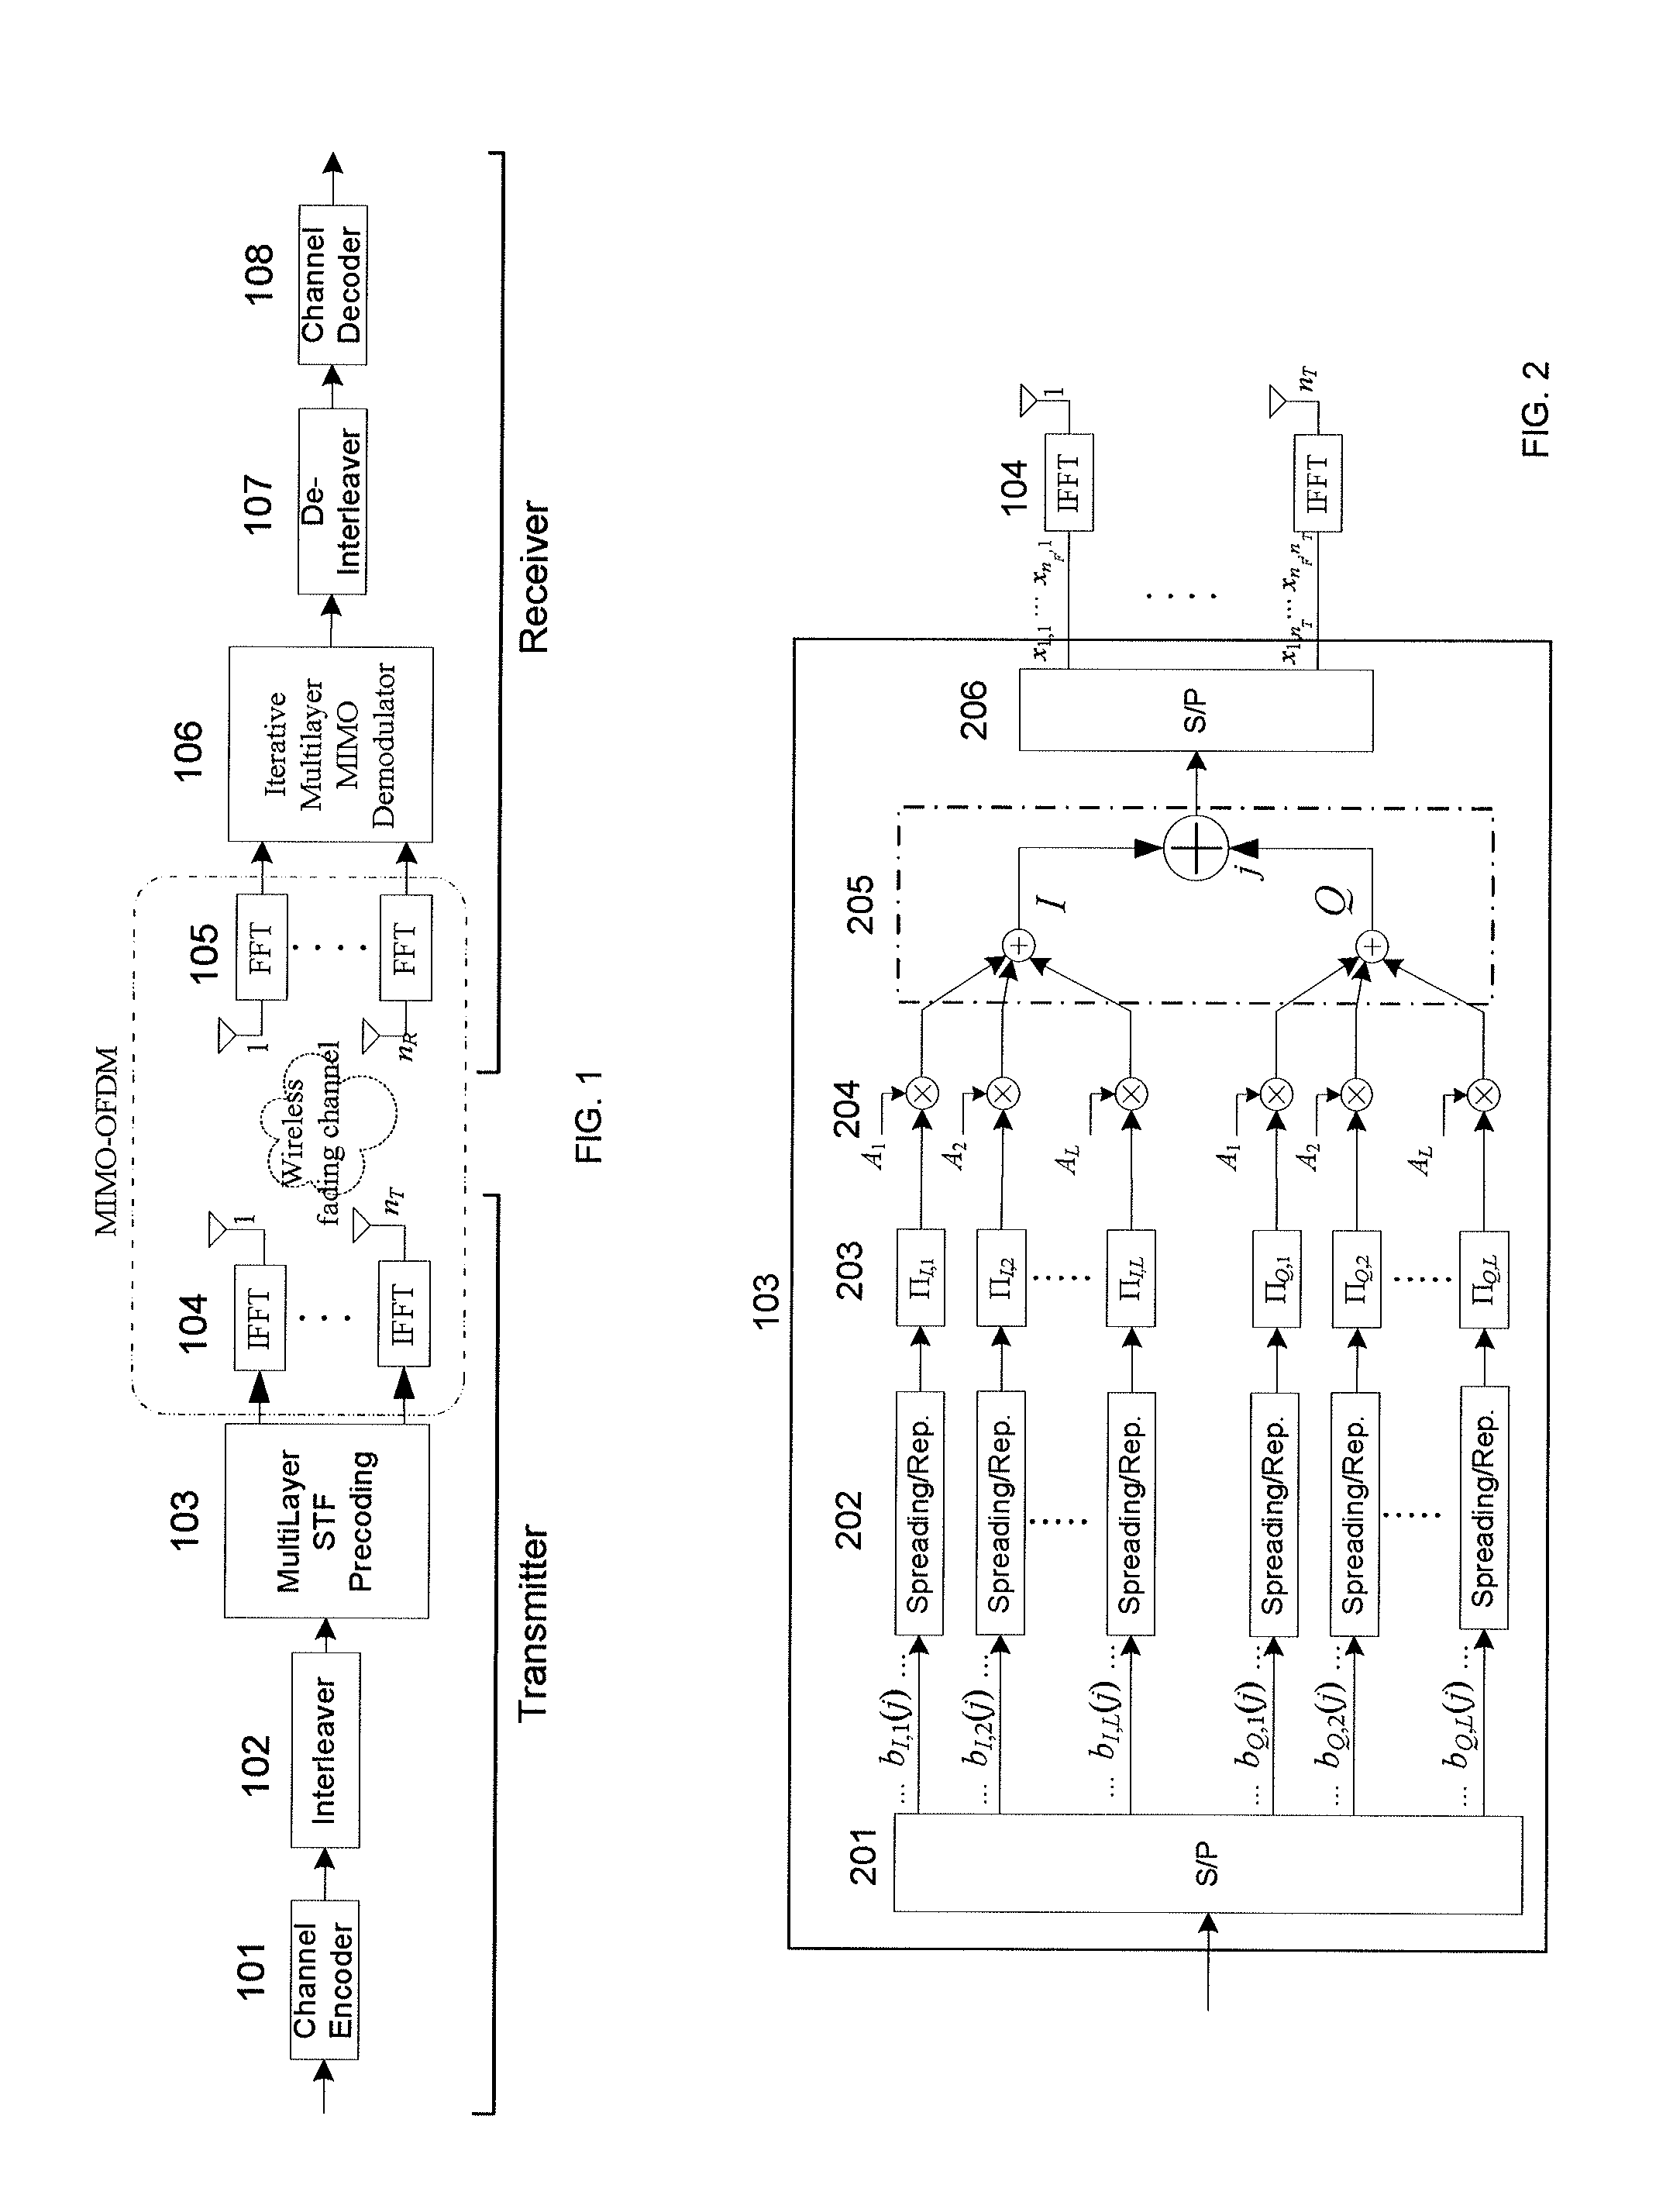 Apparatus and Method for Multilayer Space-Time-Frequency Precoding for a MIMO-OFDM Wireless Transmission System